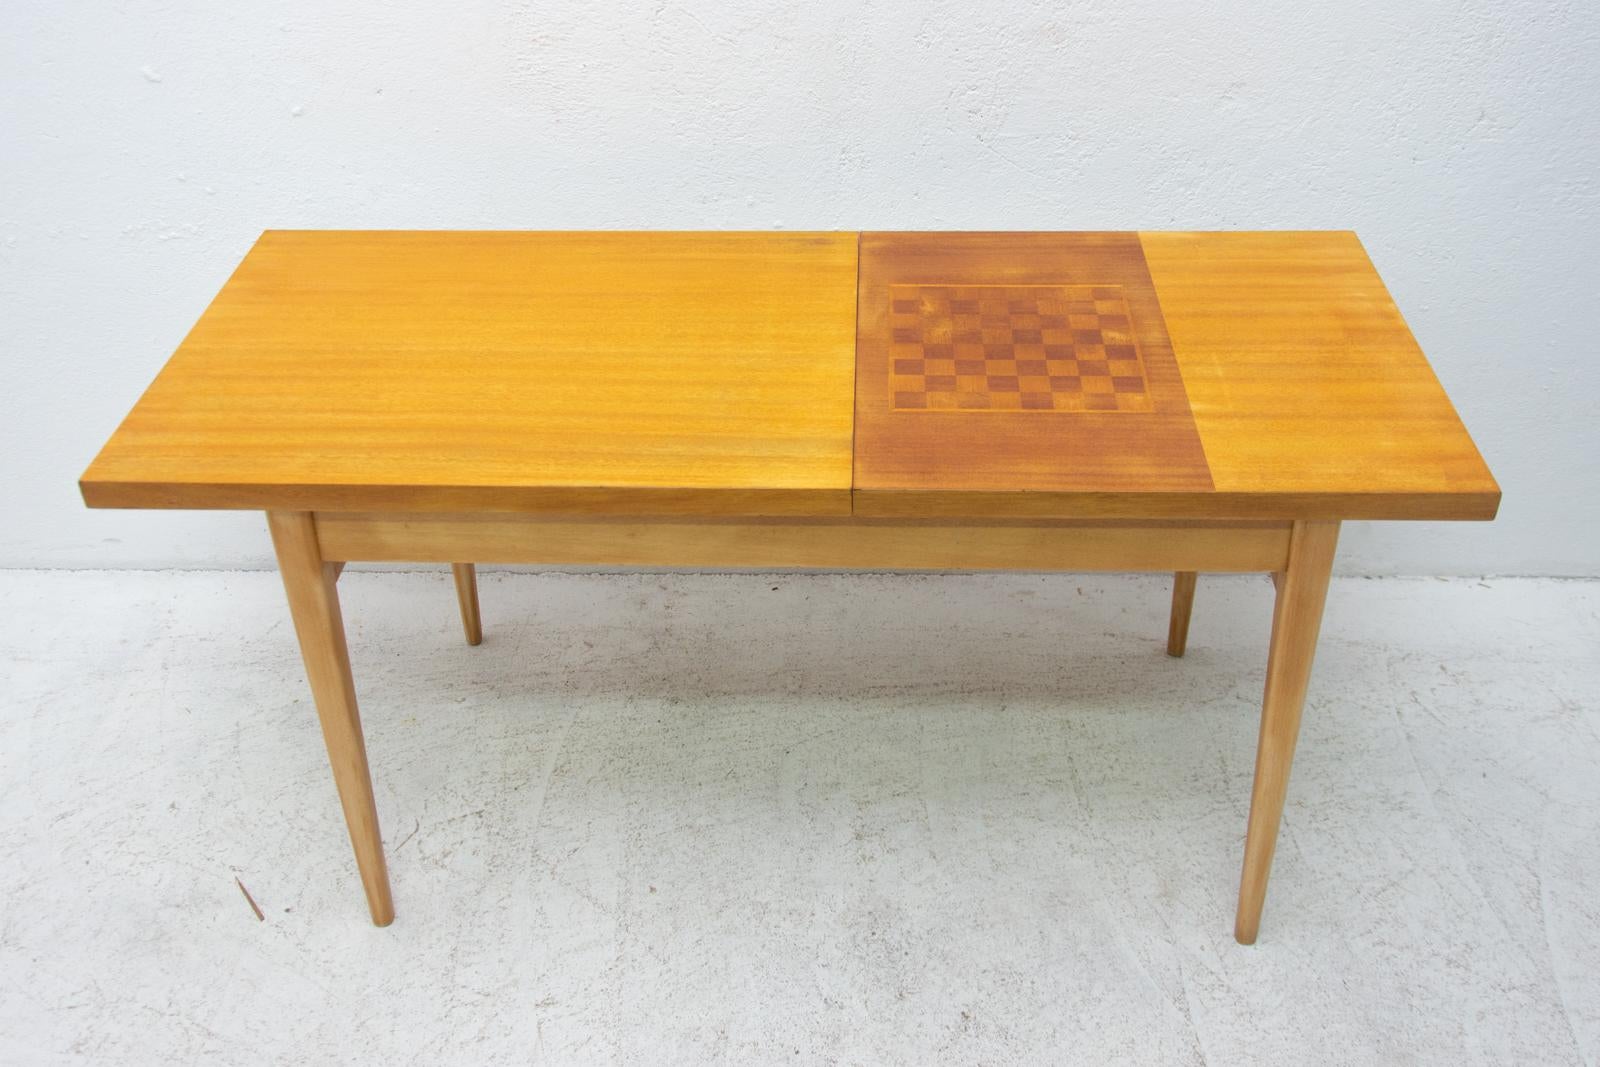 Midcentury Coffee Table with Chess Pattern, Hikor Písek, 1960s, Czechoslovakia In Good Condition In Prague 8, CZ